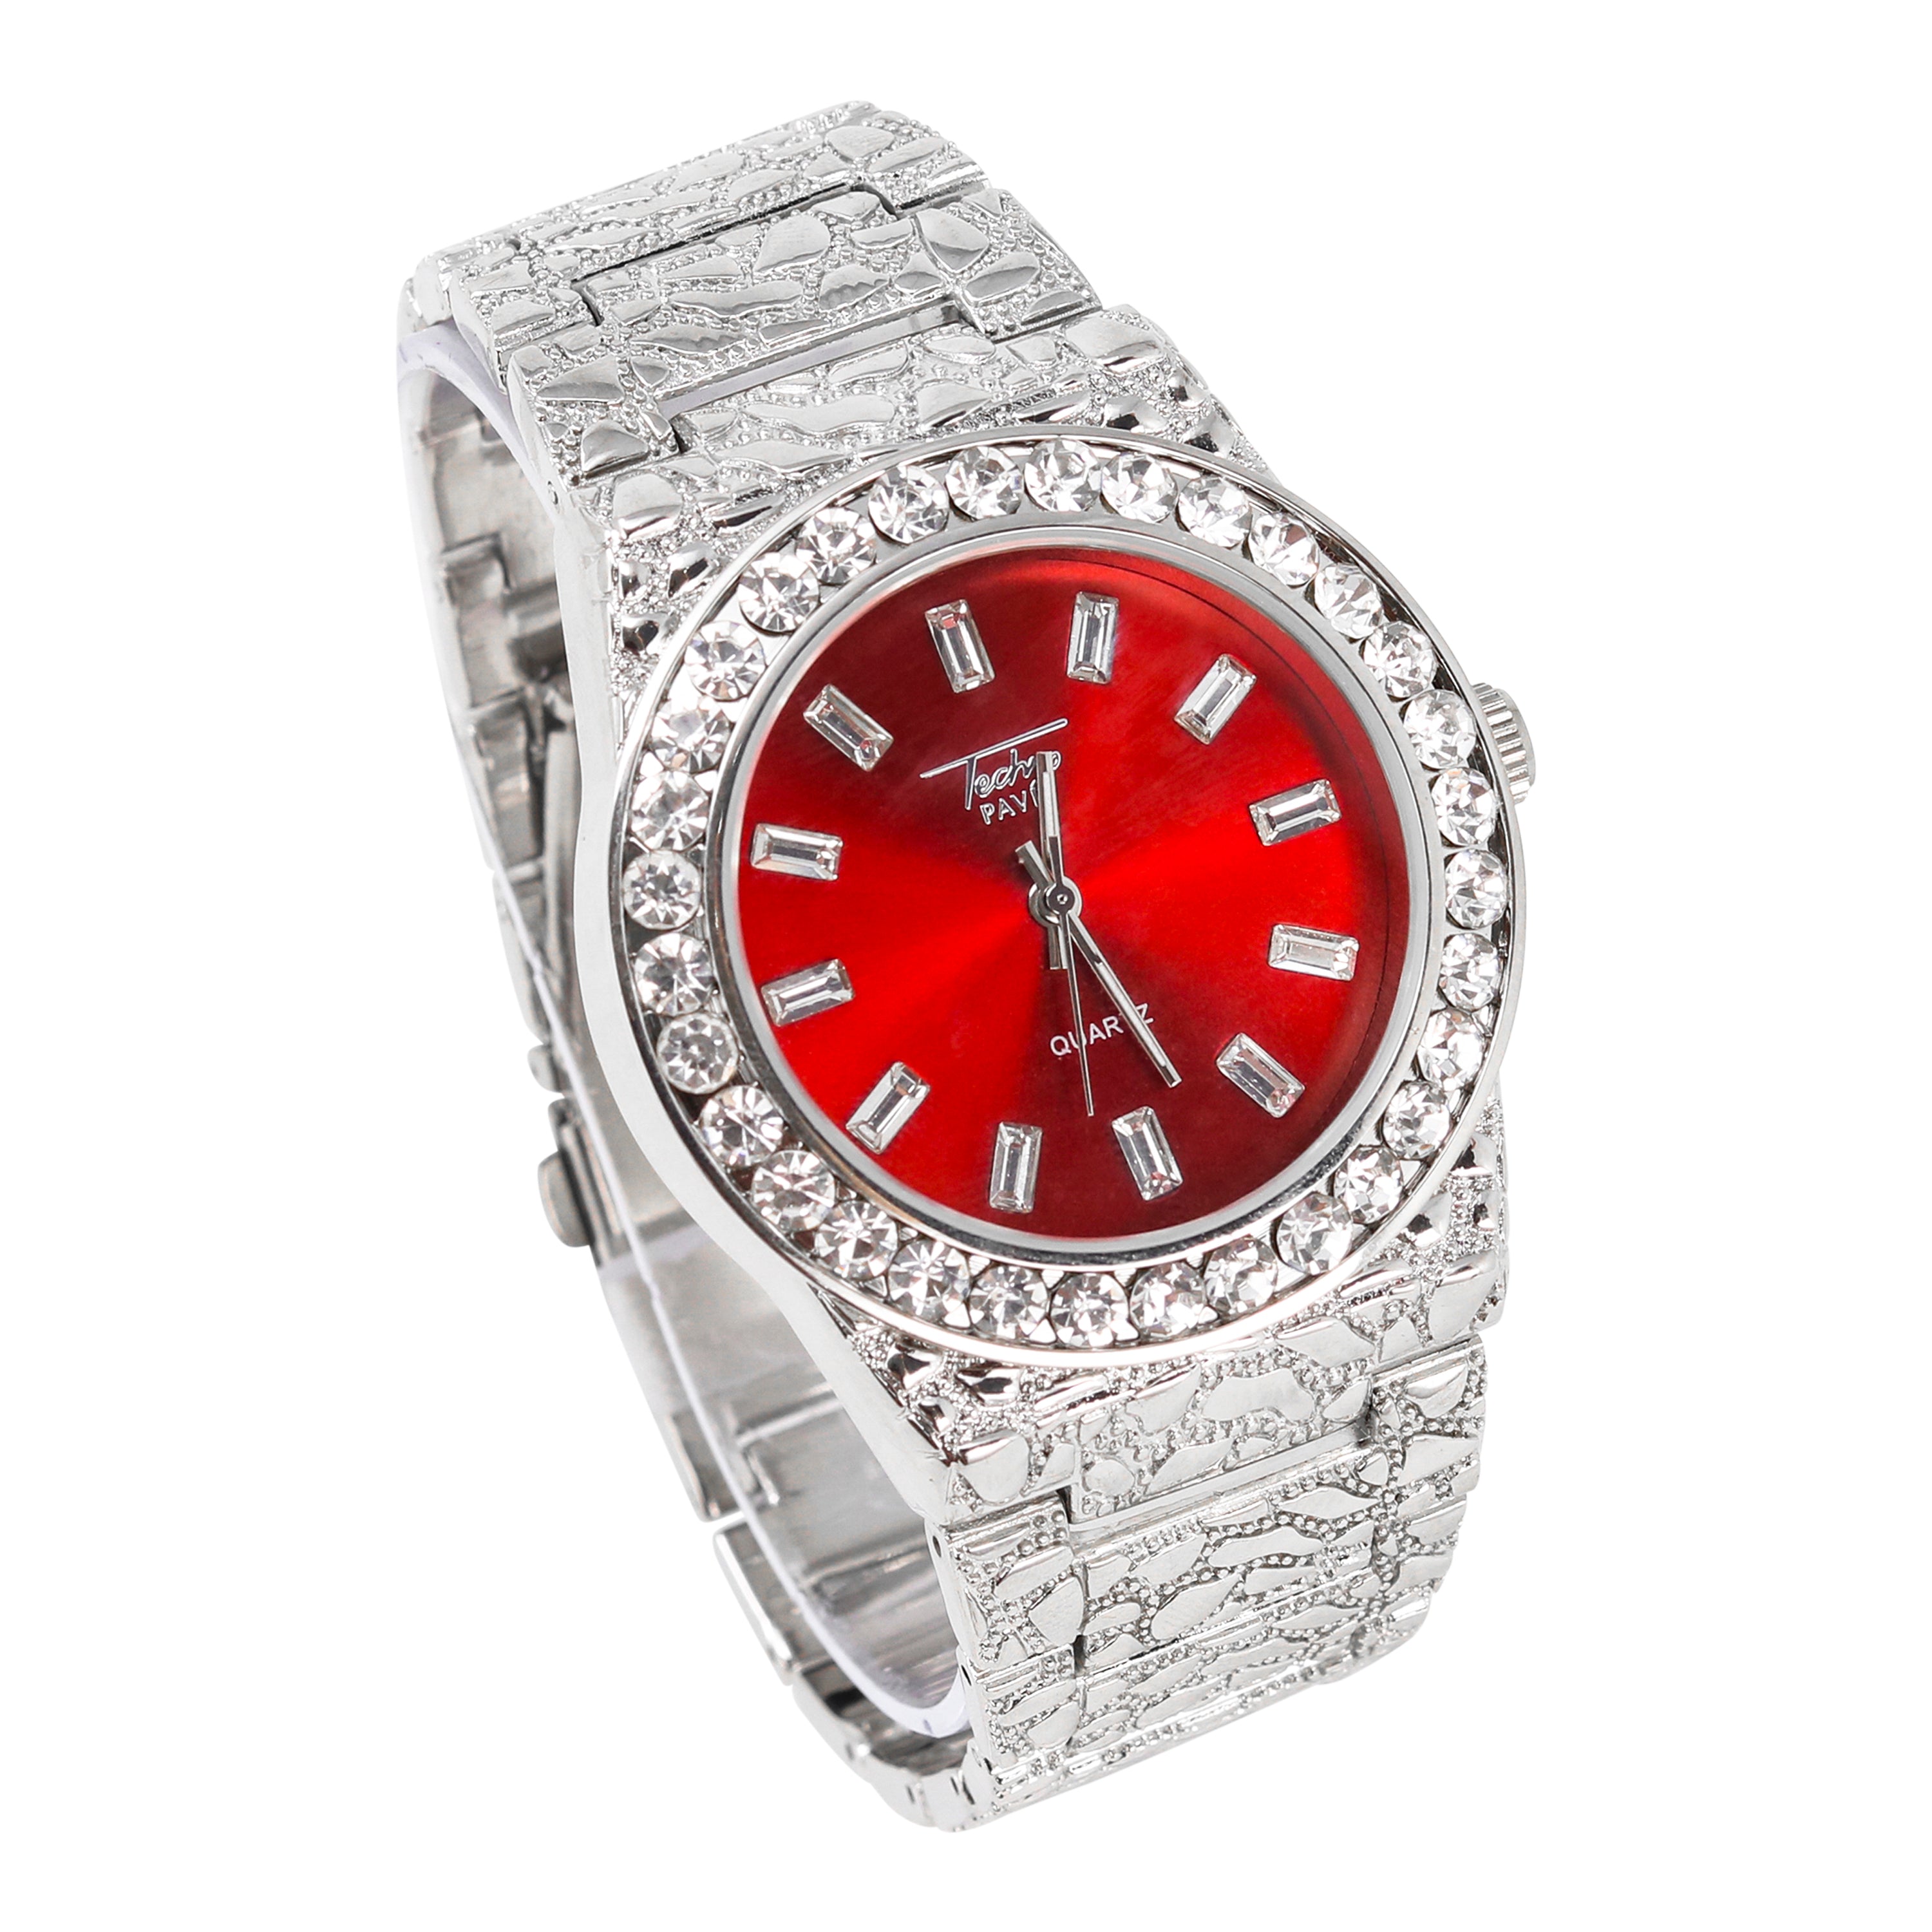 Men's Round Iced Out Watch 43mm Silver - Nugget Band